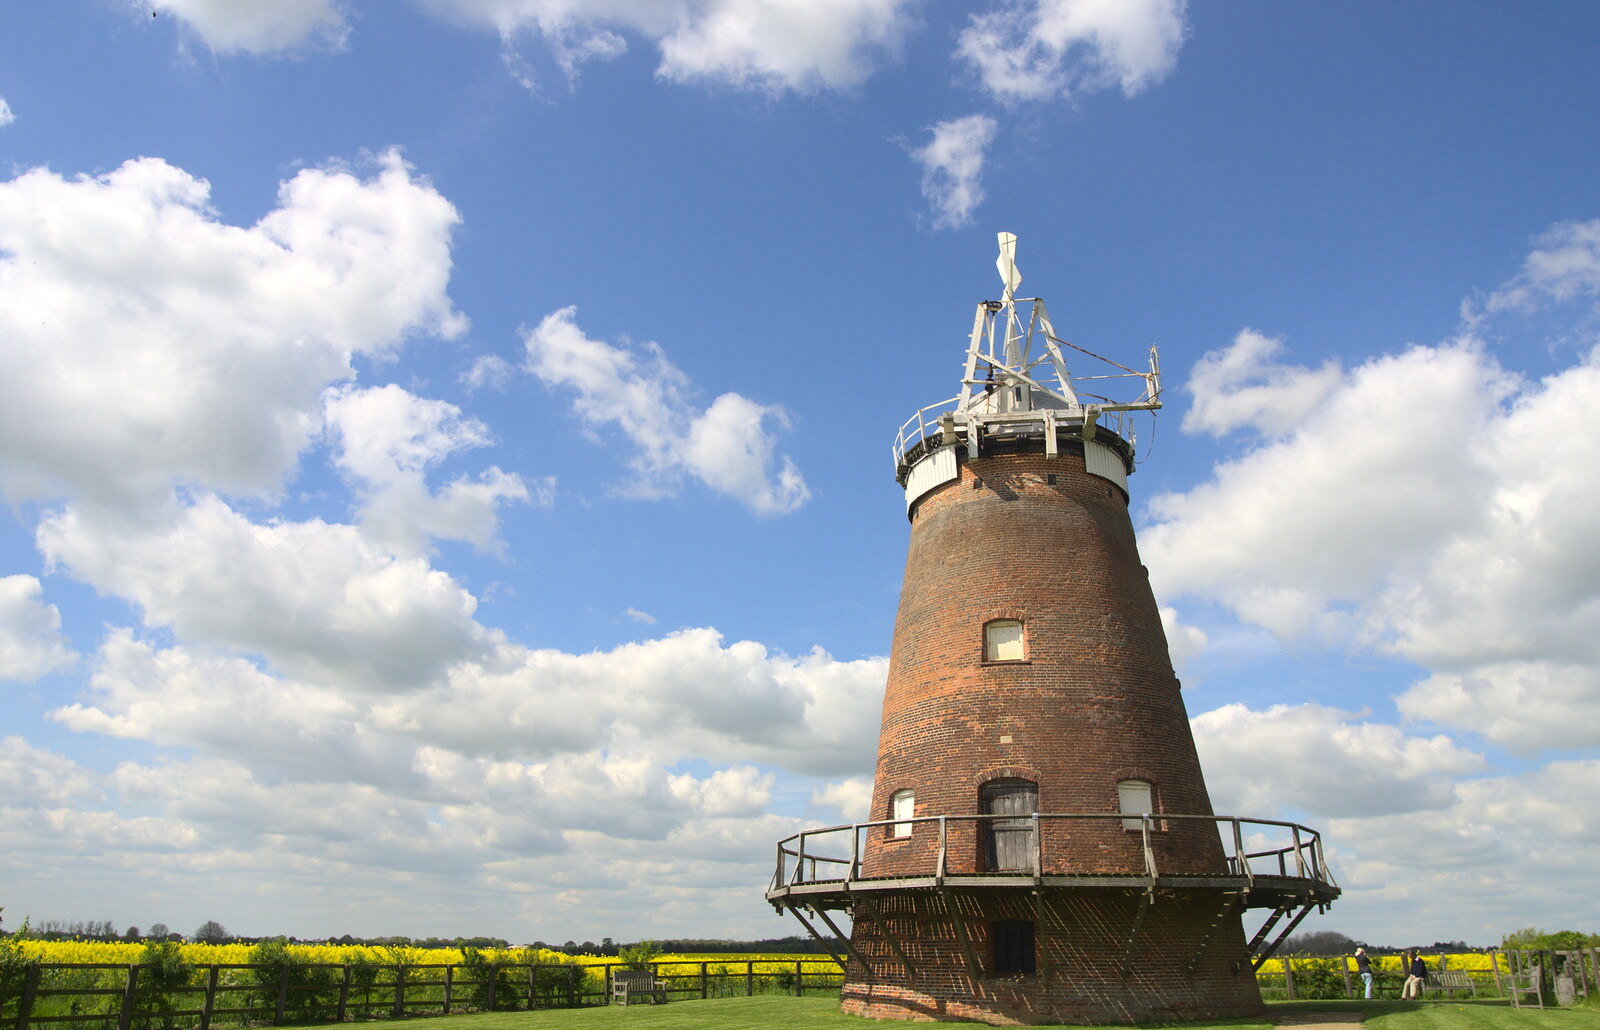 John Webb's Windmill has lost its sails from The BSCC Cycling Weekend, The Swan Inn, Thaxted, Essex - 12th May 2012